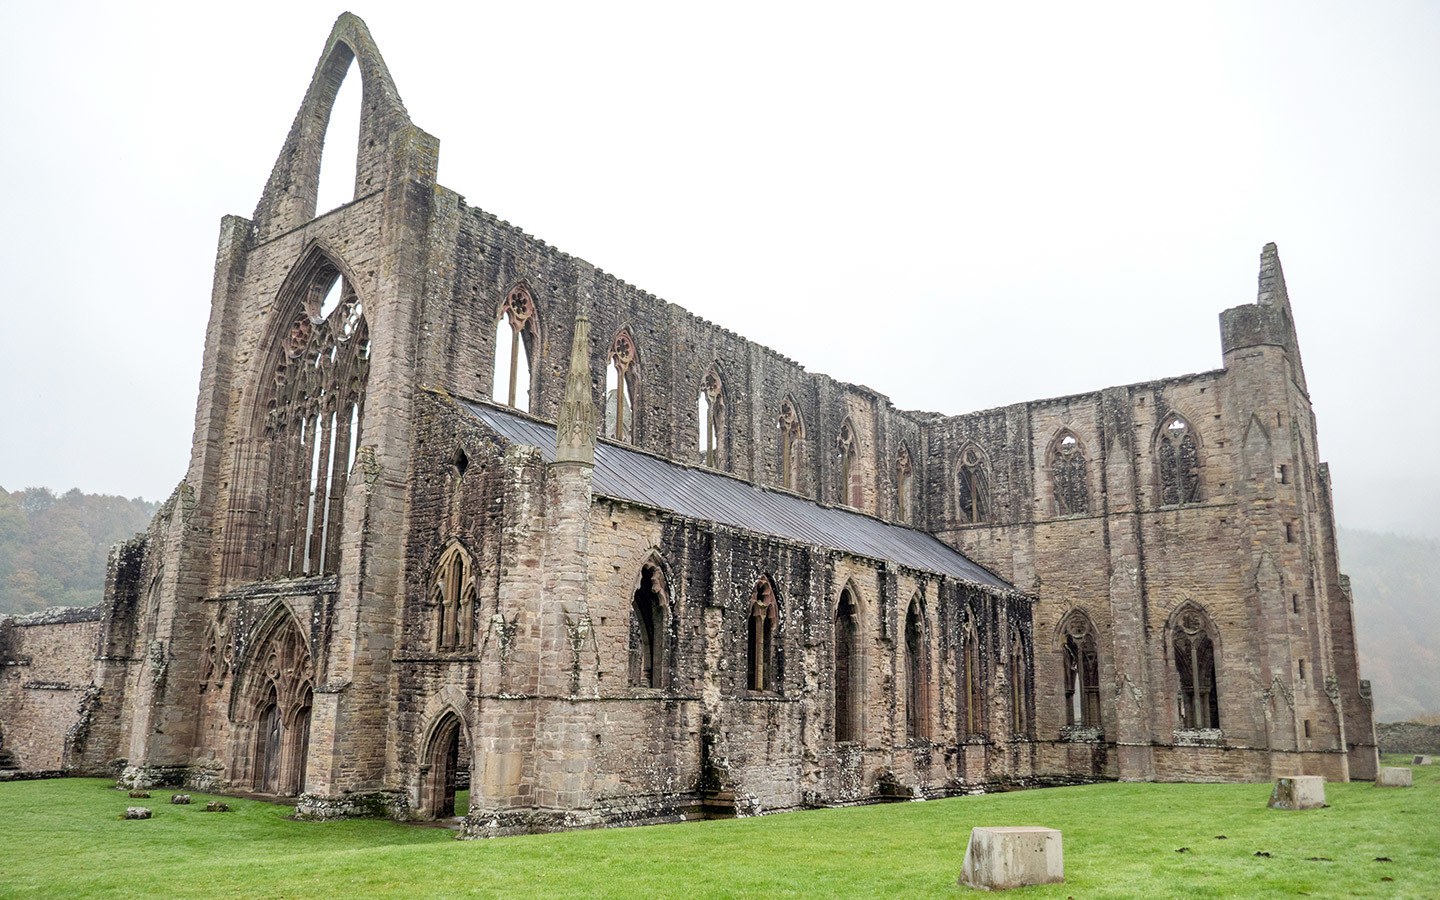 The ruins of Tintern Abbey in the Wye Valley